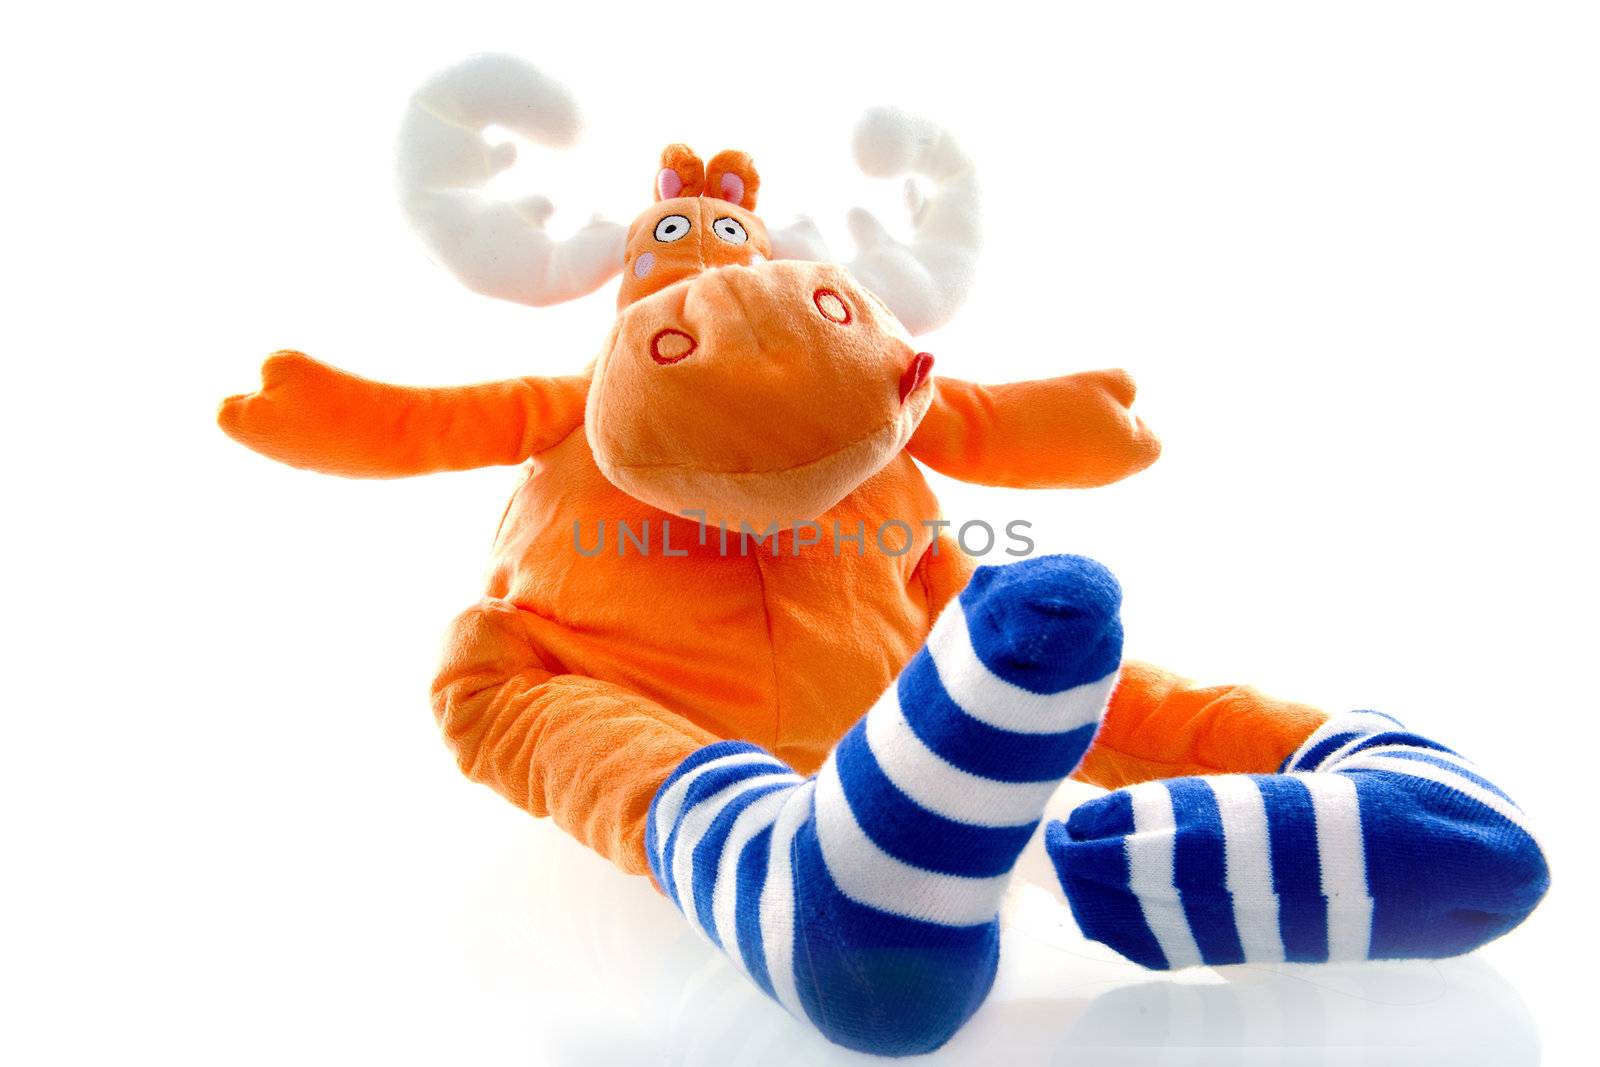 rudolph the red nose reindeer on a white background